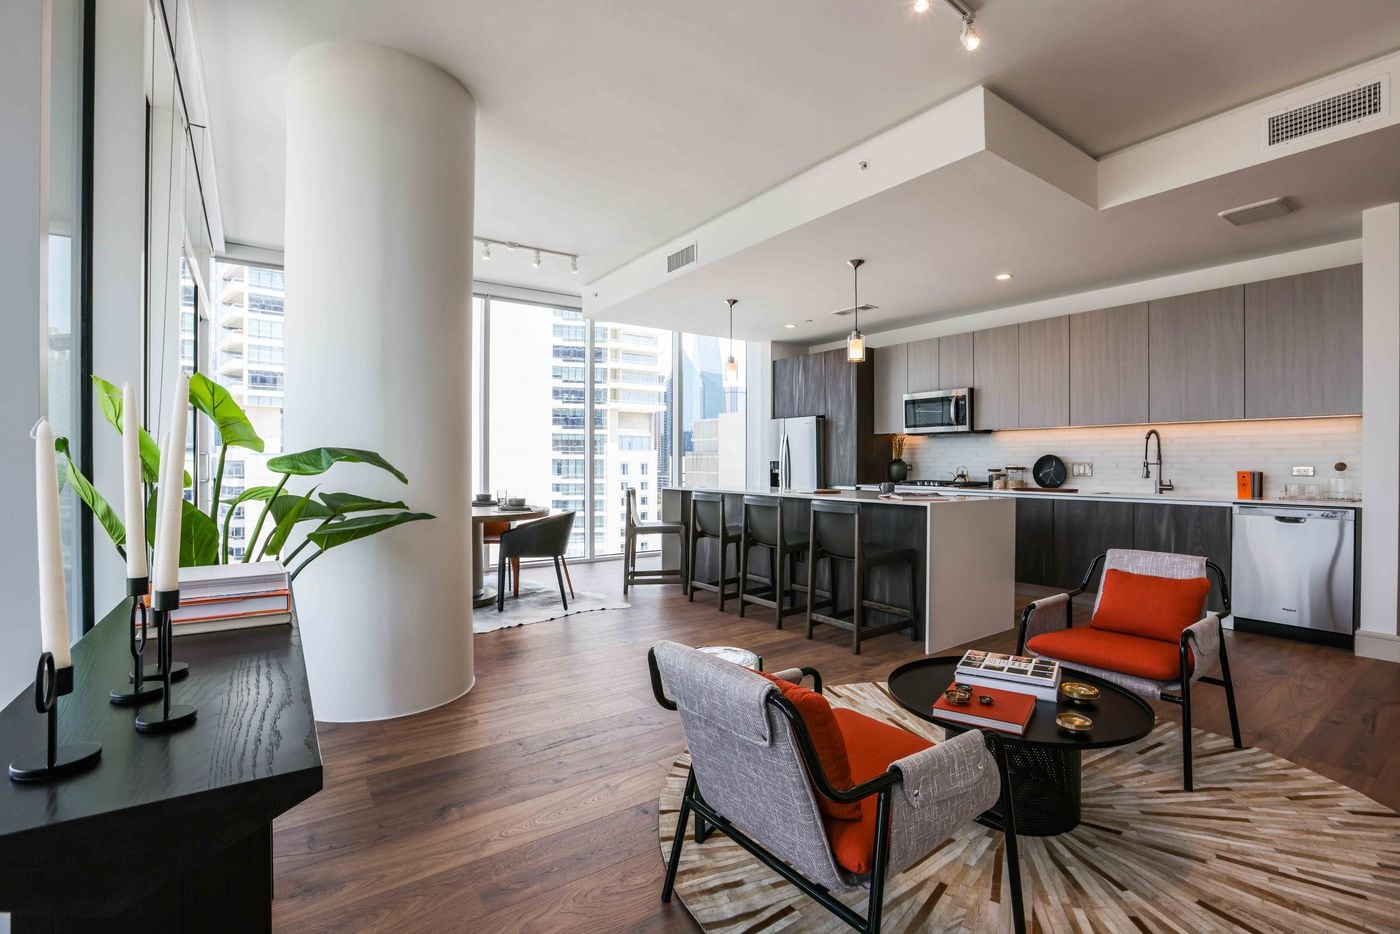 Kitchen and living room in a 2 beds 2 bath apartment at The Victor. (Lola Gomez / The Dallas Morning News)